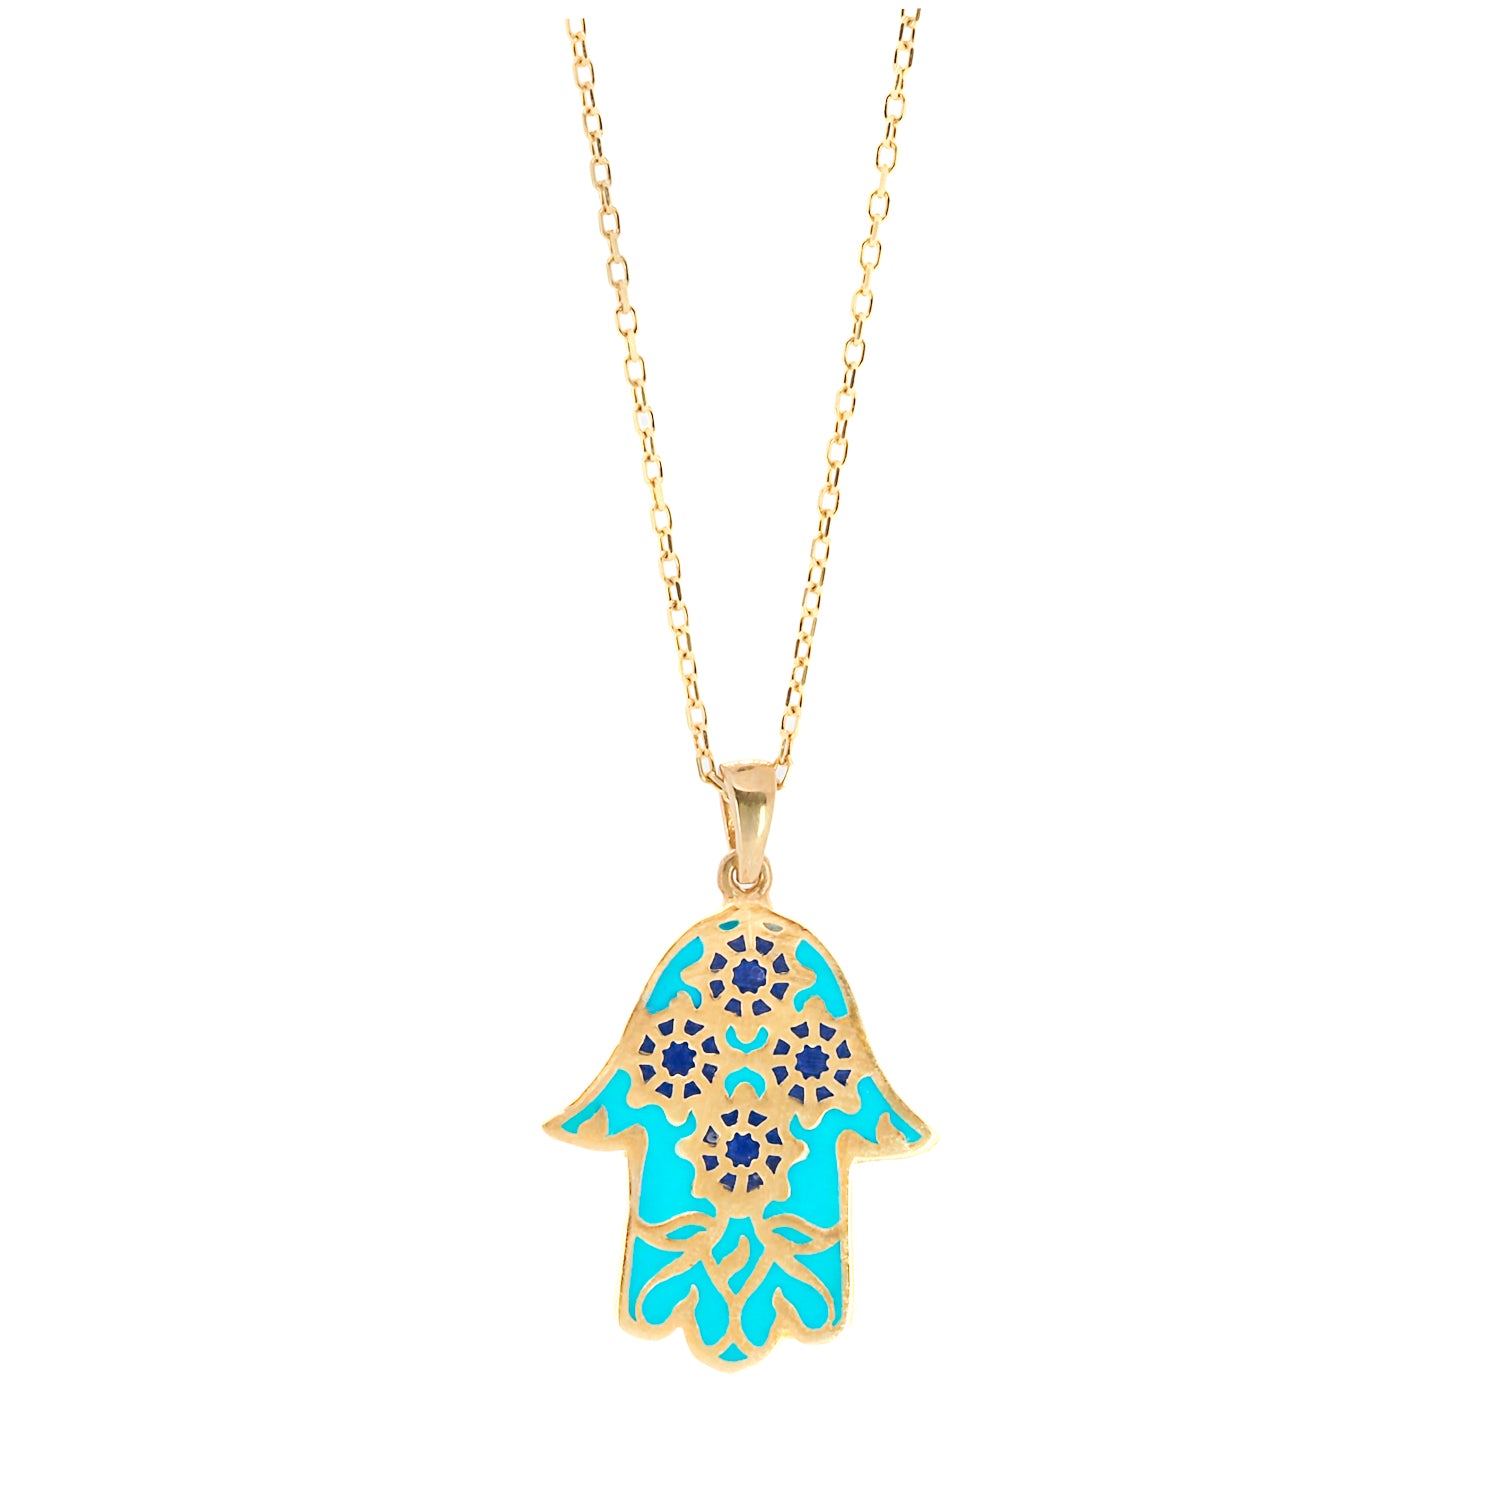 The Good Vibes Enamel Hamsa Necklace, a captivating blend of spirituality and positive energy.